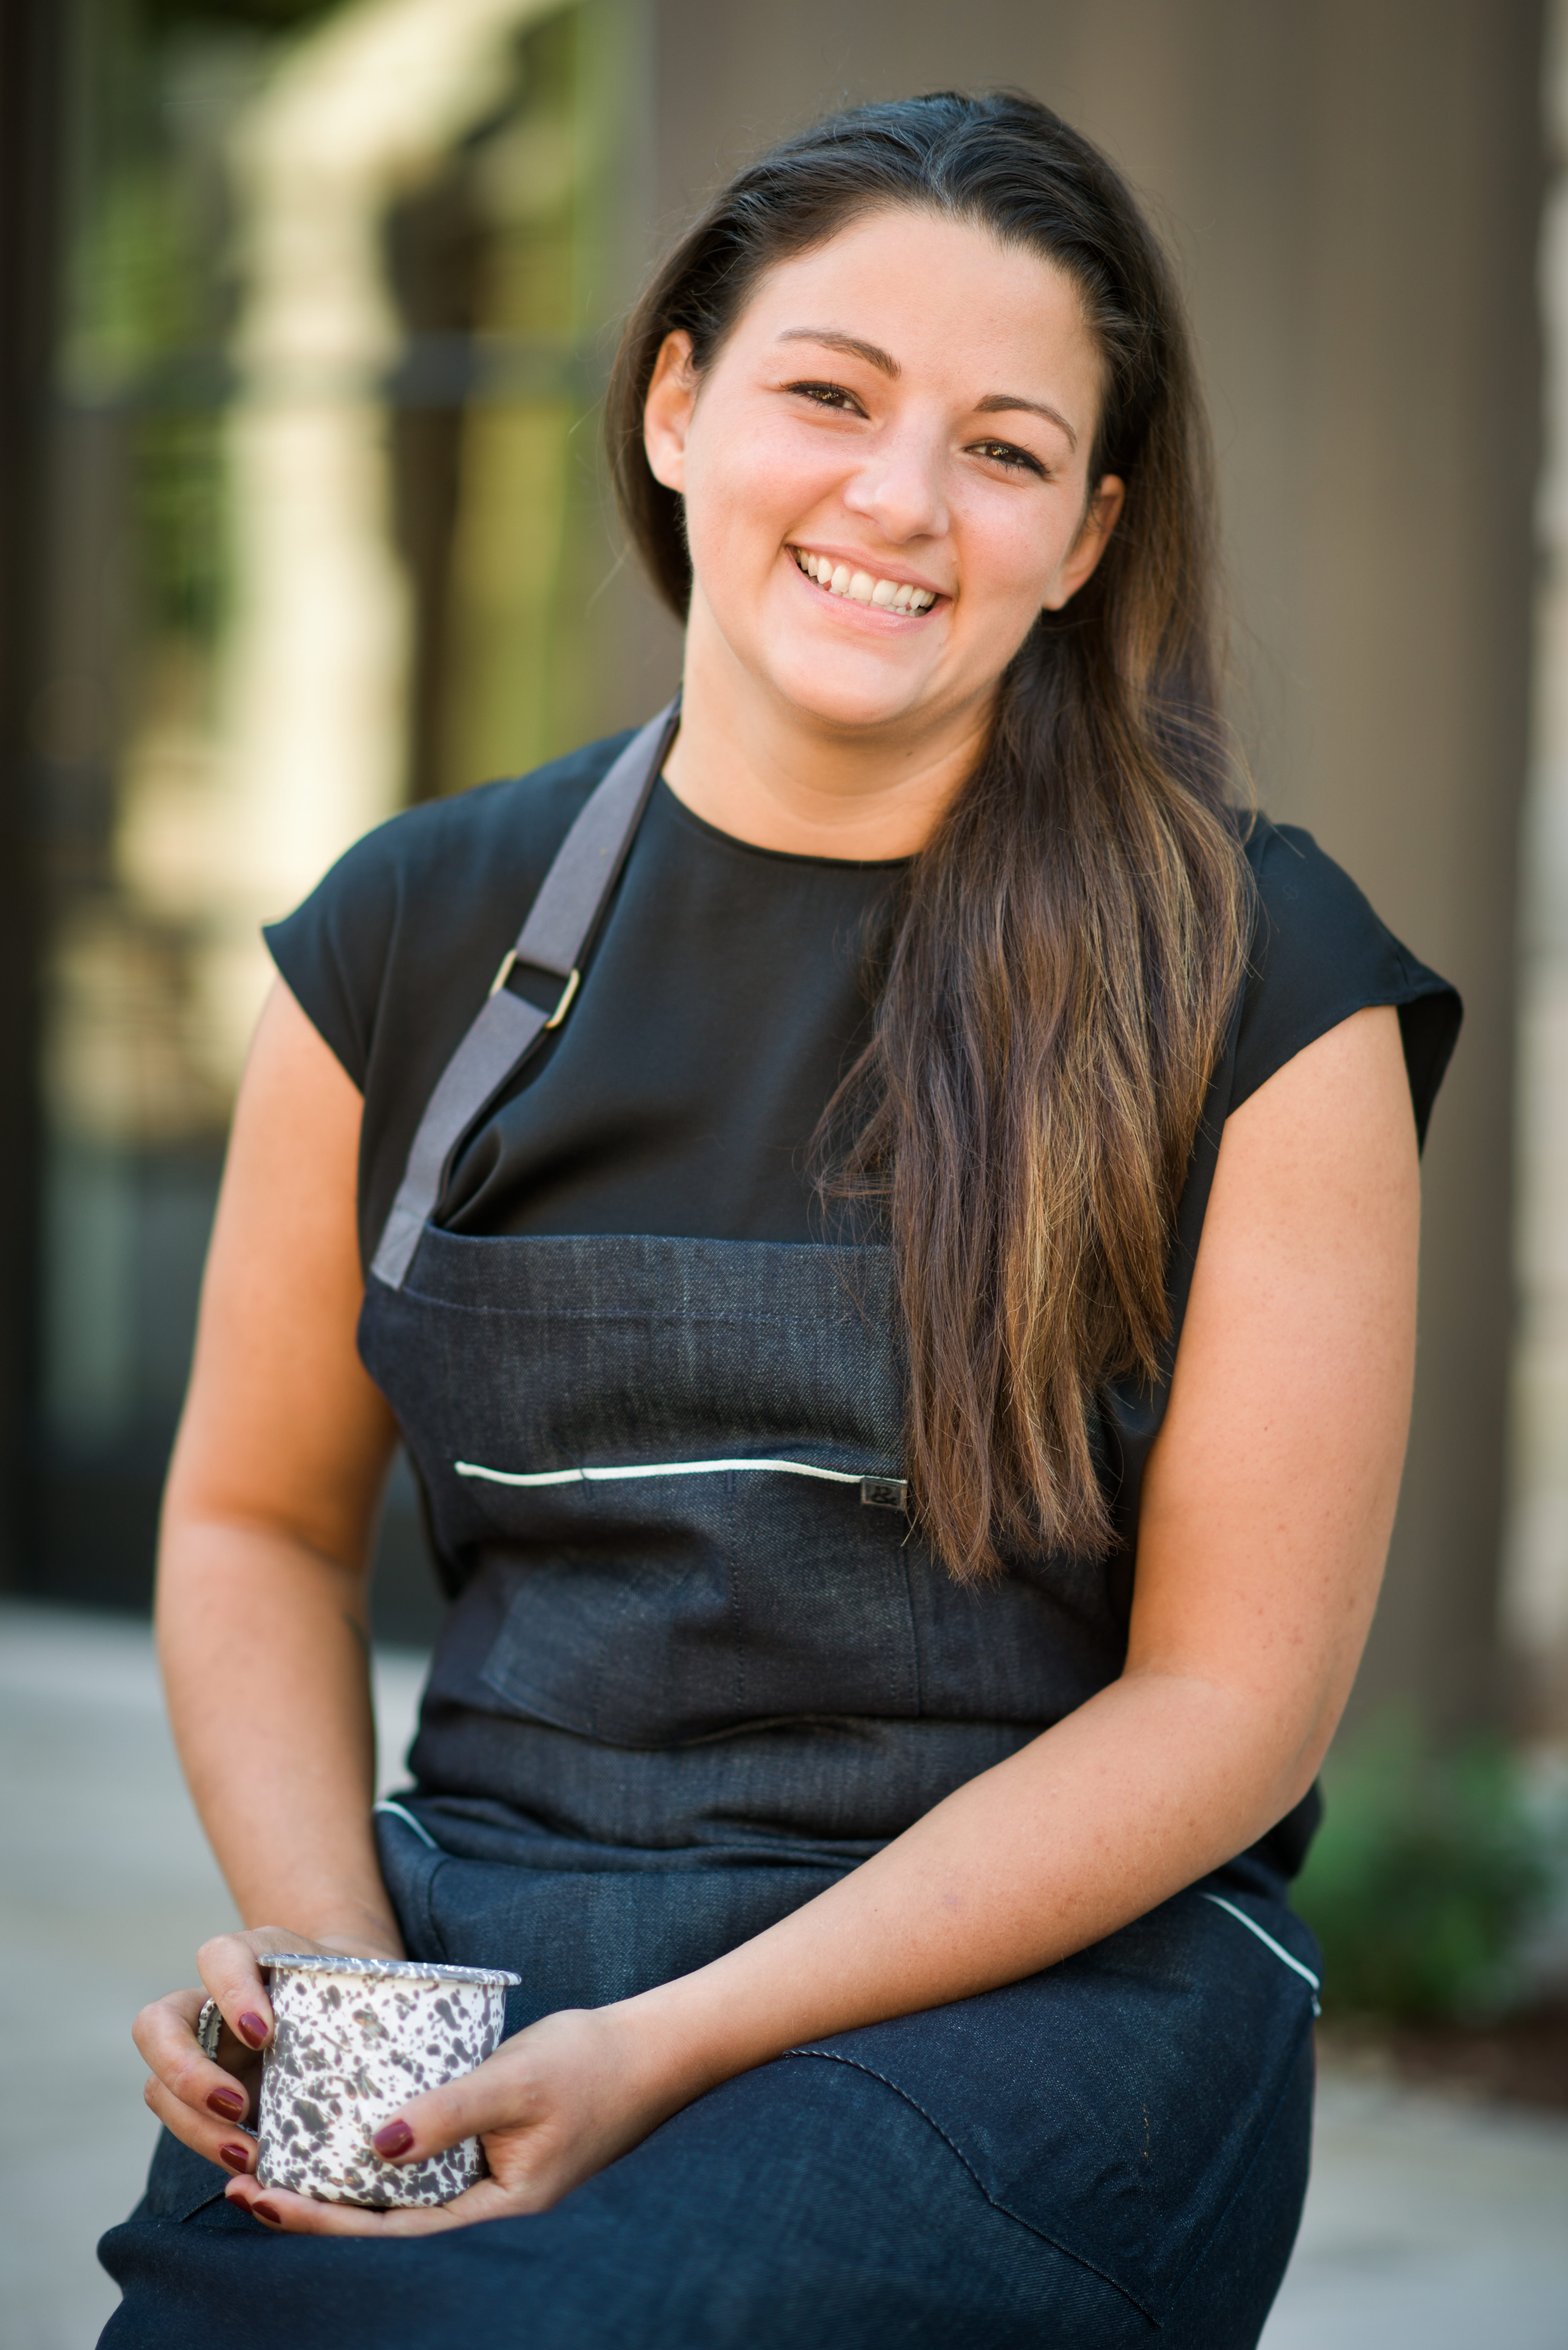 Lead by chef Sarah Heller, who hails from local Napa Valley restaurant, the new seasonal menu at Gather Café showcases local Napa Valley ingredients.